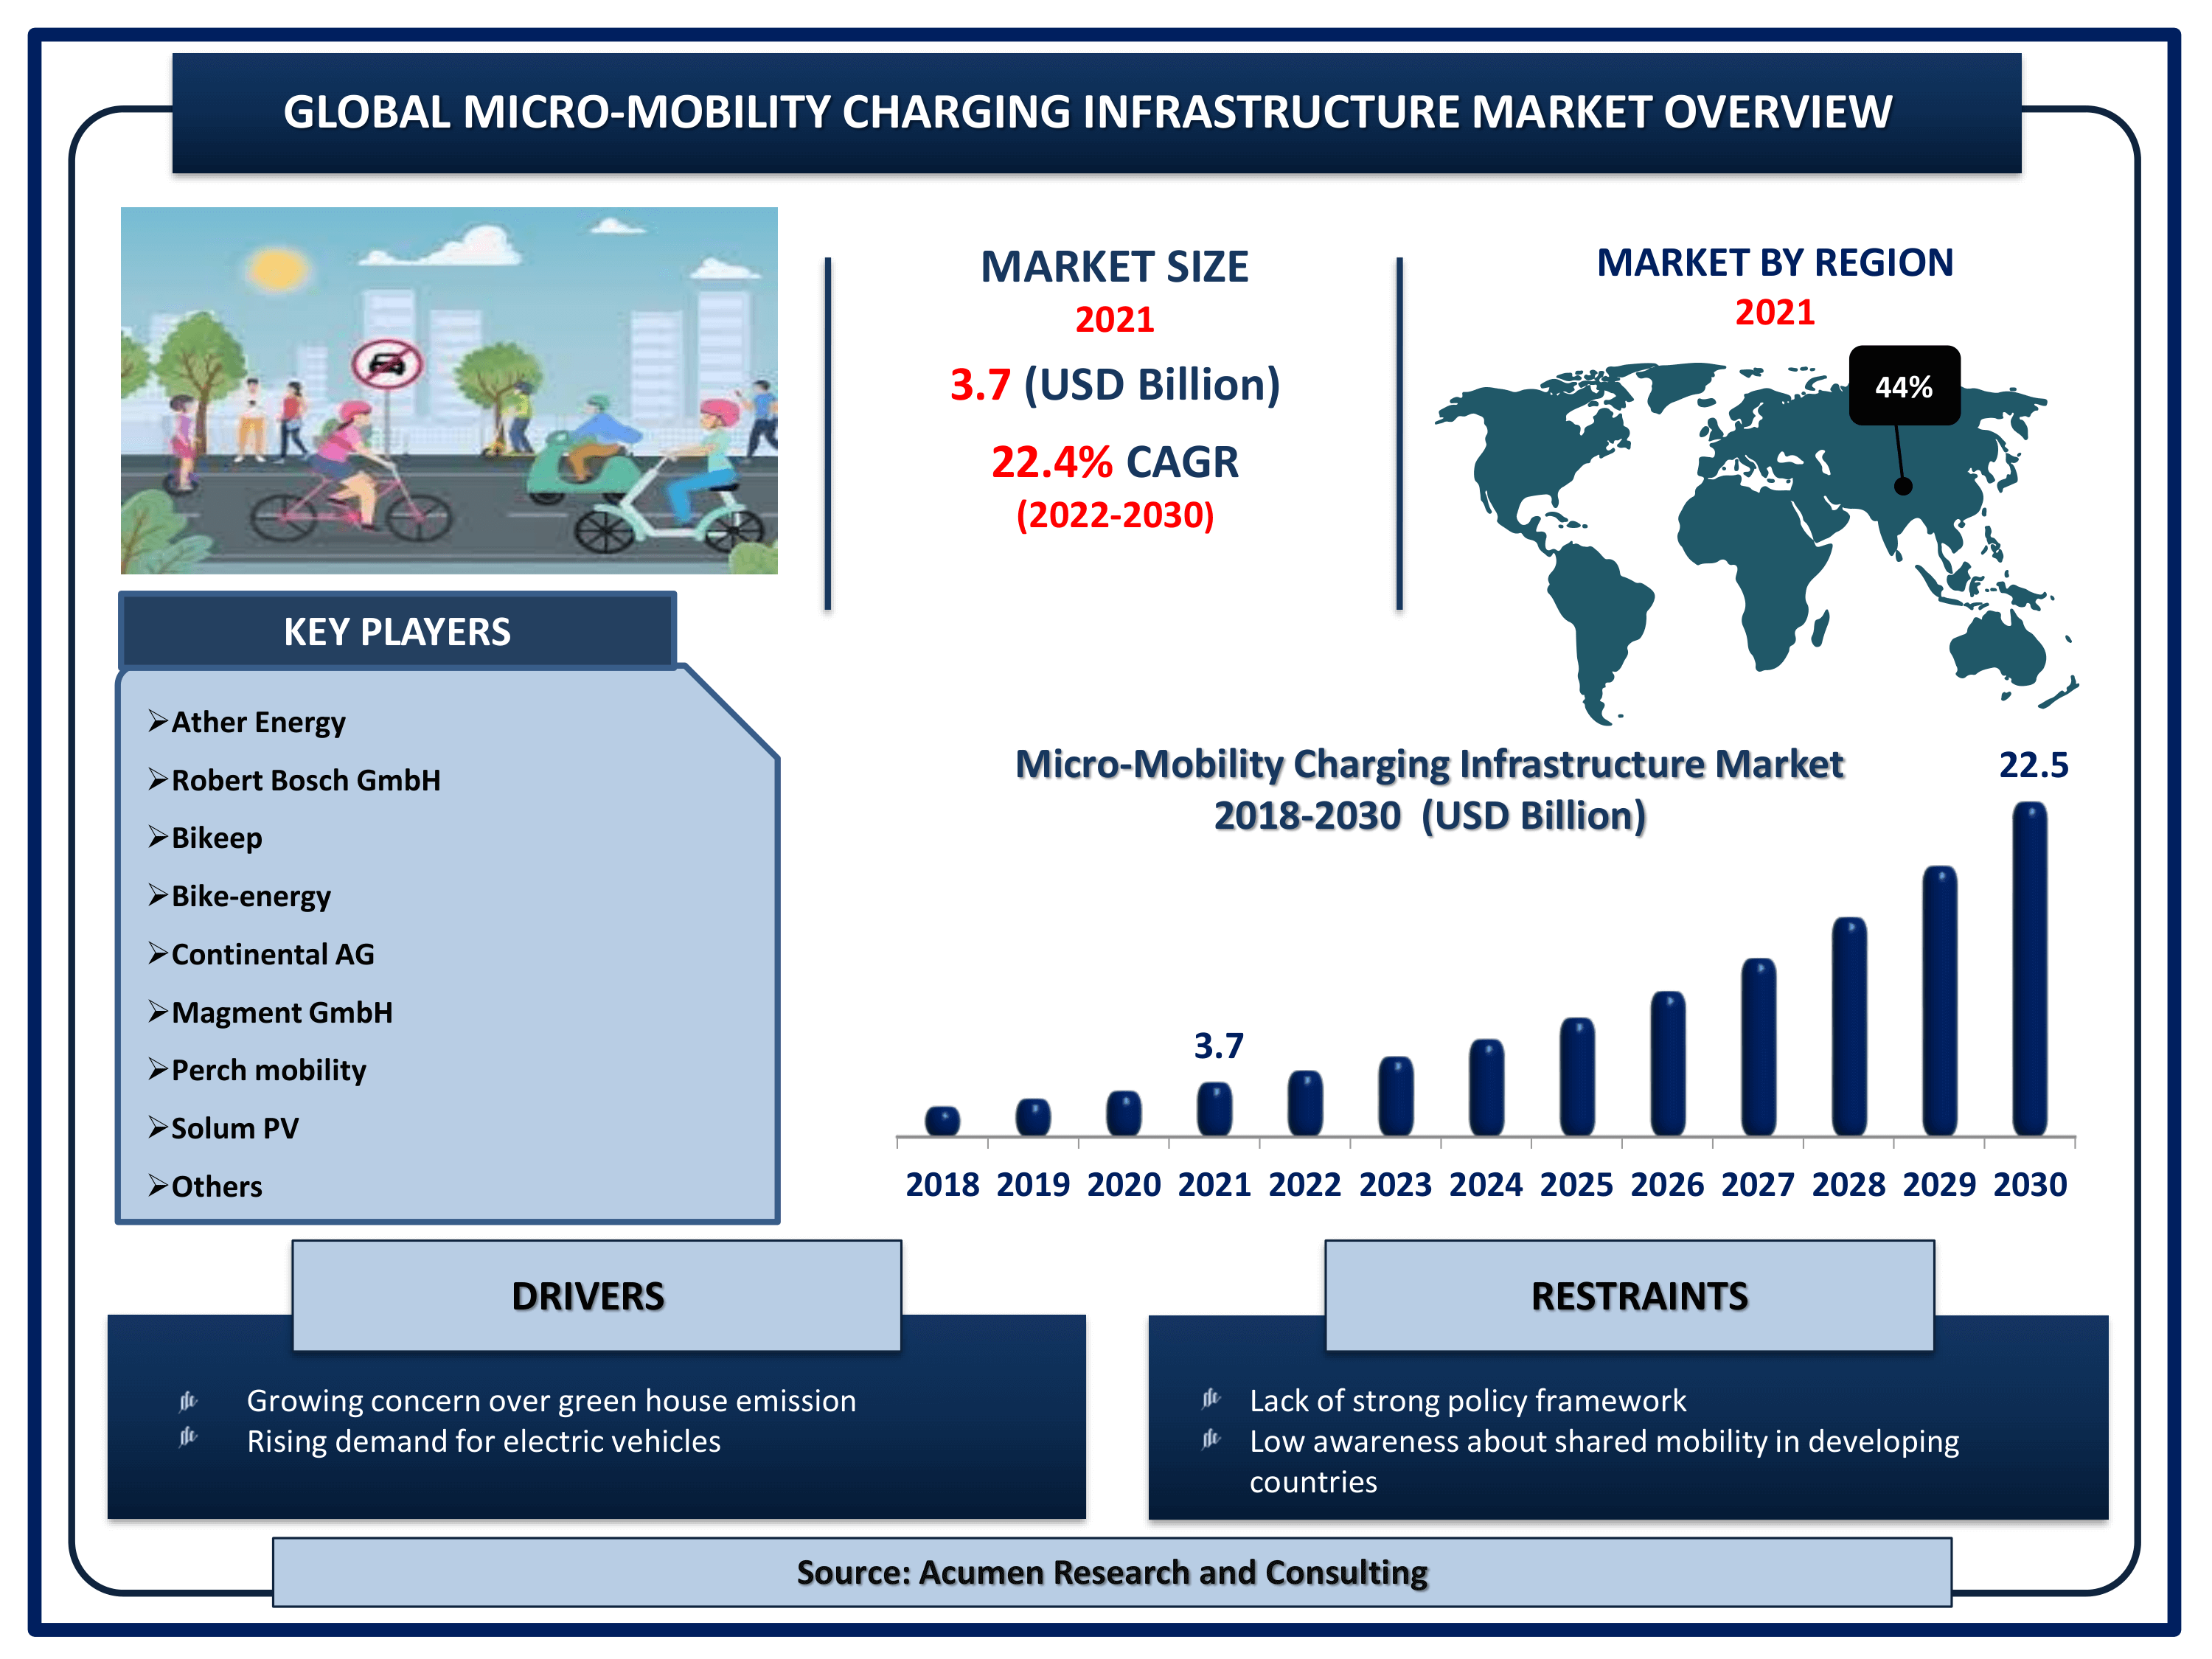 Global micro-mobility charging infrastructure market revenue is estimated to reach USD 22.5 Billion by 2030 with a CAGR of 22.4% from 2022 to 2030